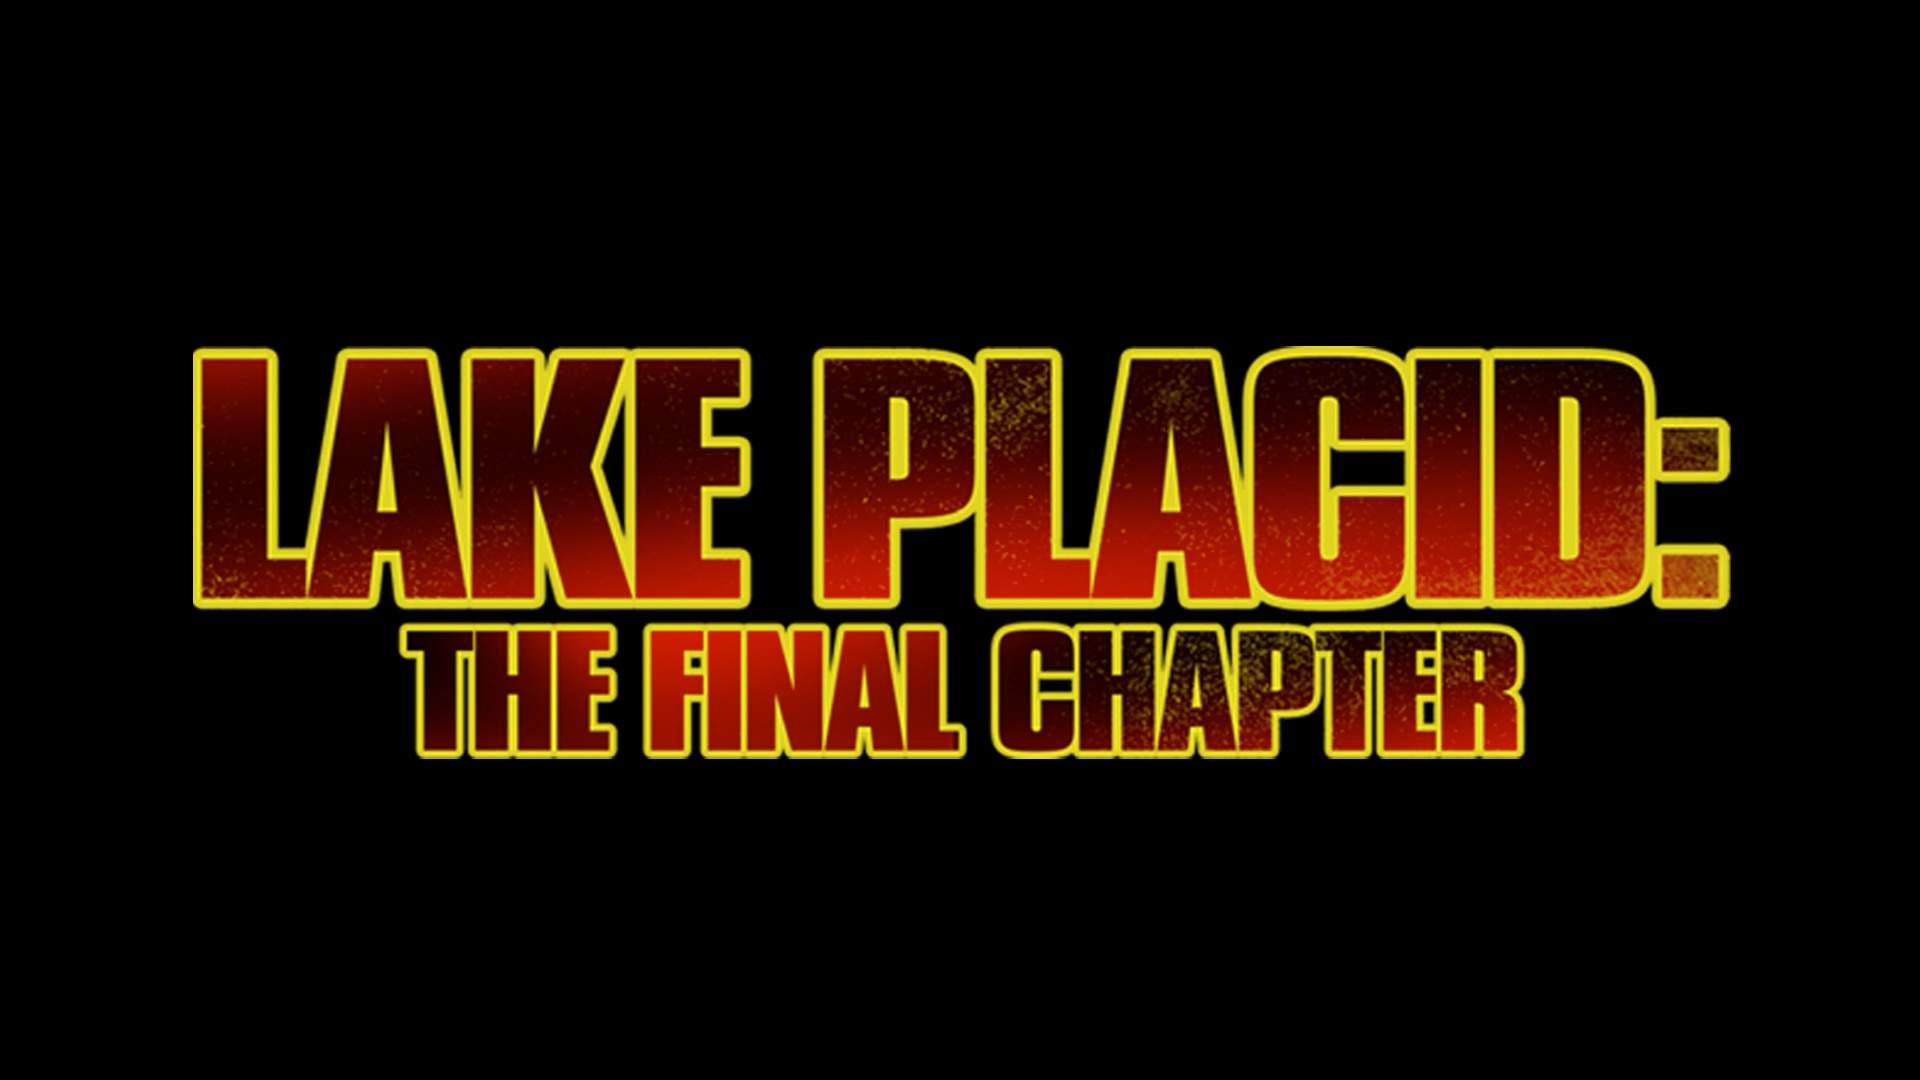 lake placid the final chapter